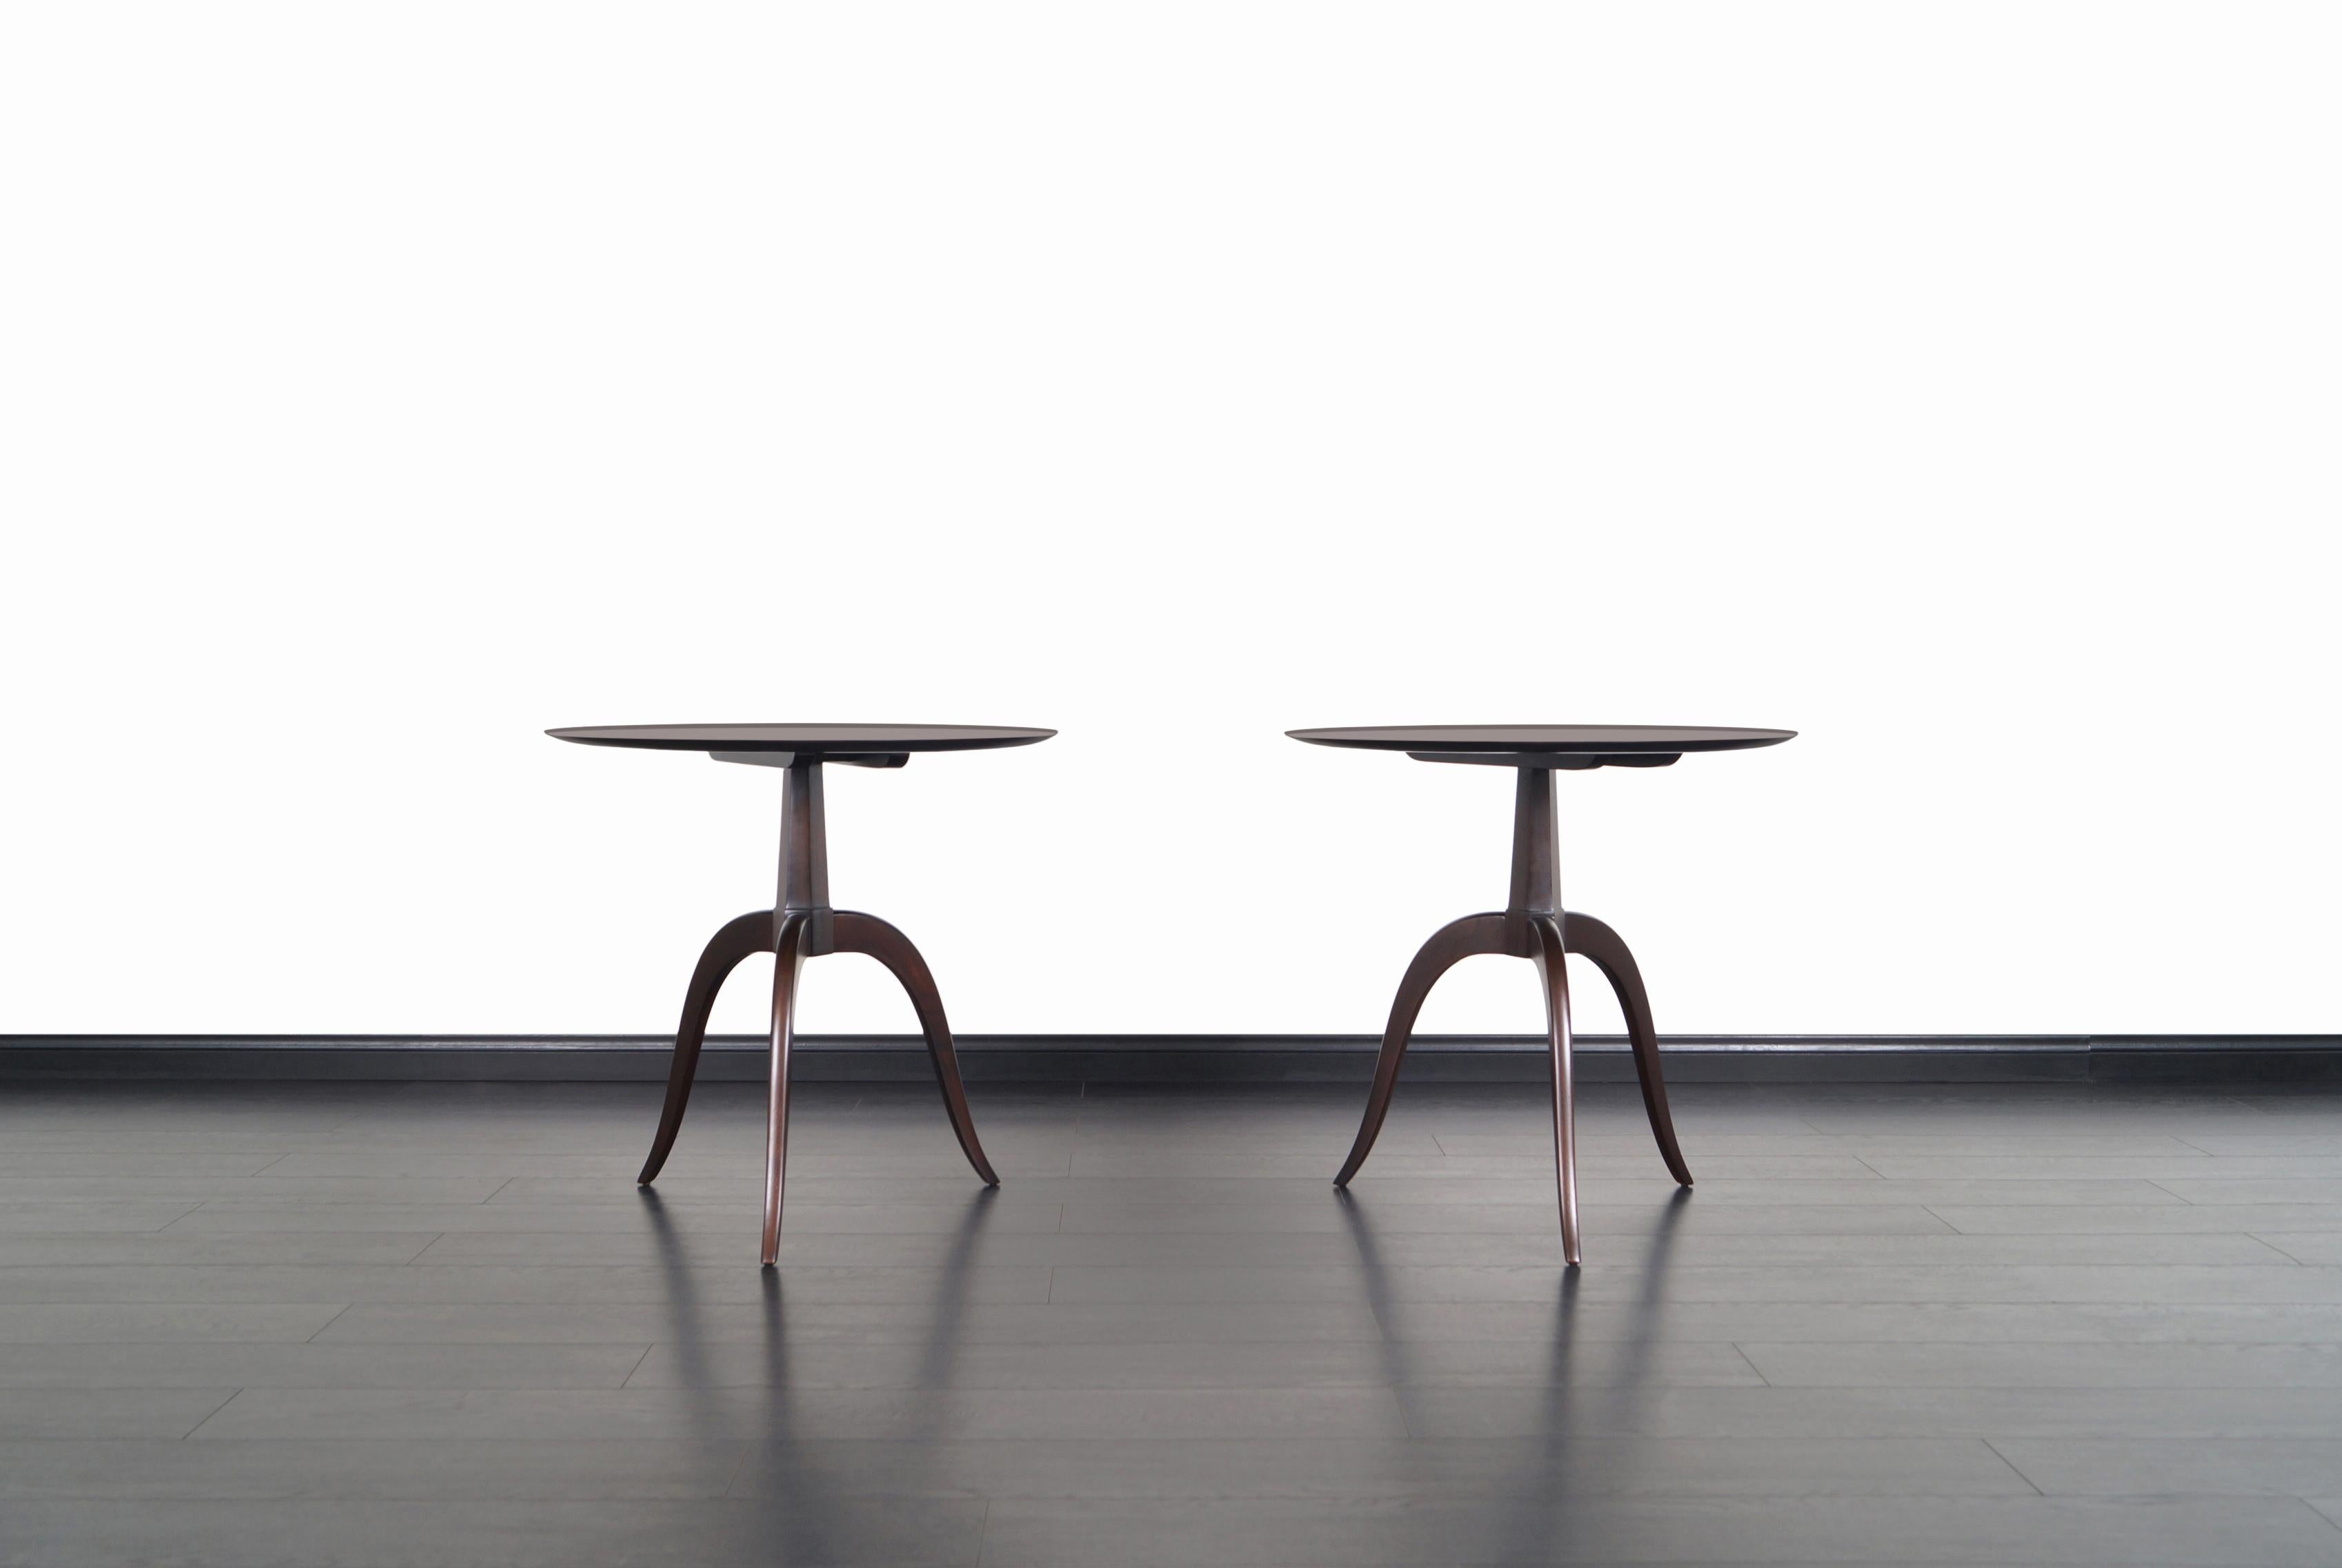 Elegant pair of vintage side or occasional tables designed by Edward J. Wormley for Dunbar in the United States. These extraordinary tables, also known as model #2010, feature a number of fine details that give these pieces a delightful sculptural